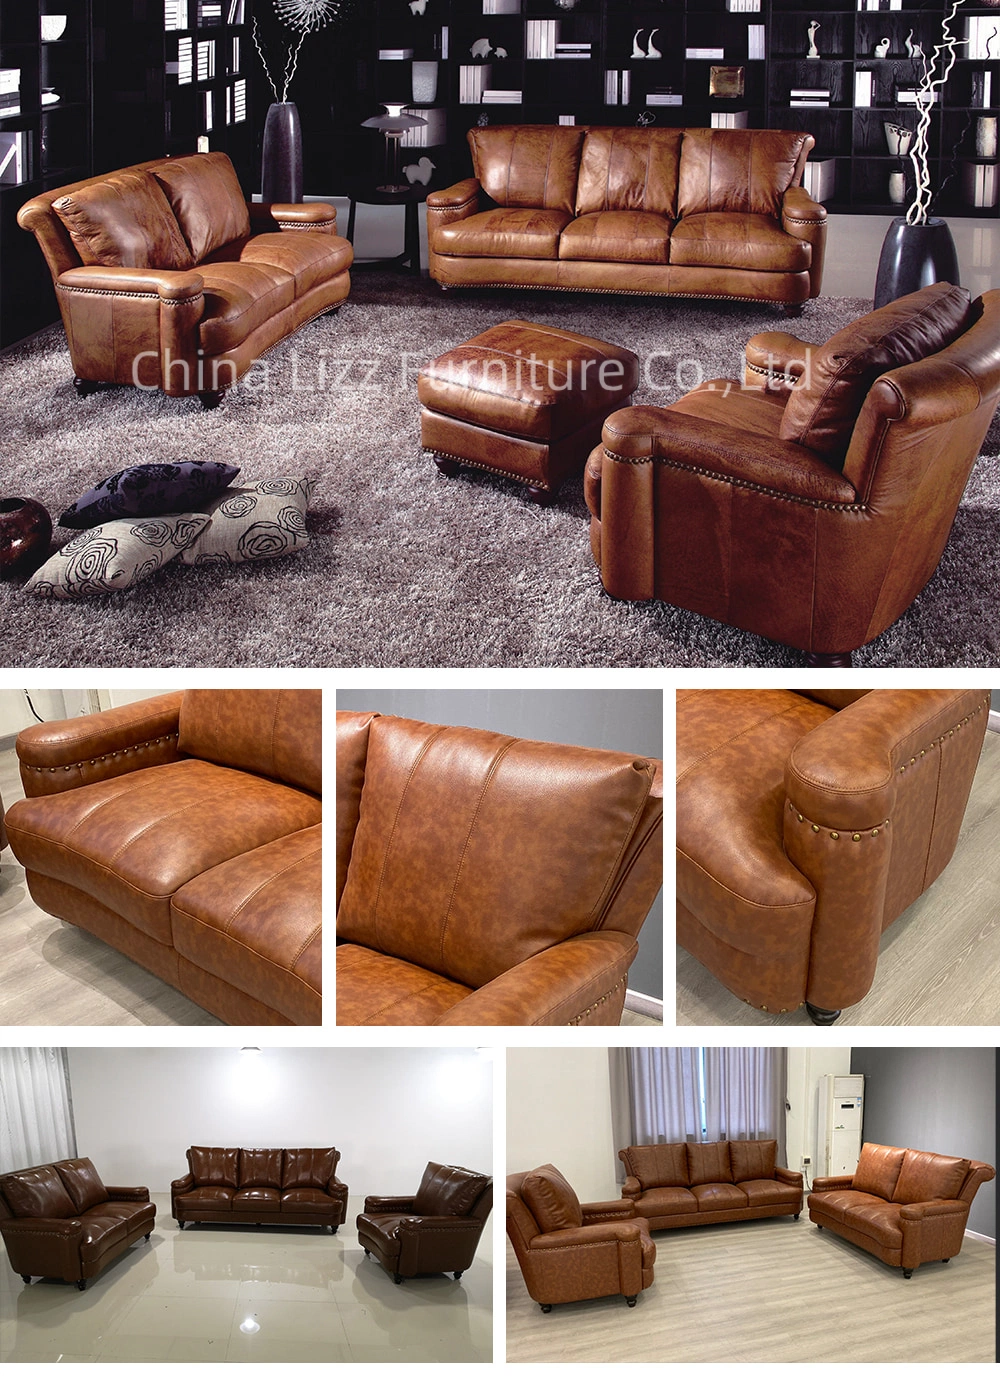 Online Discount Vintage Design Home Living Room Furniture Real Leather Couch